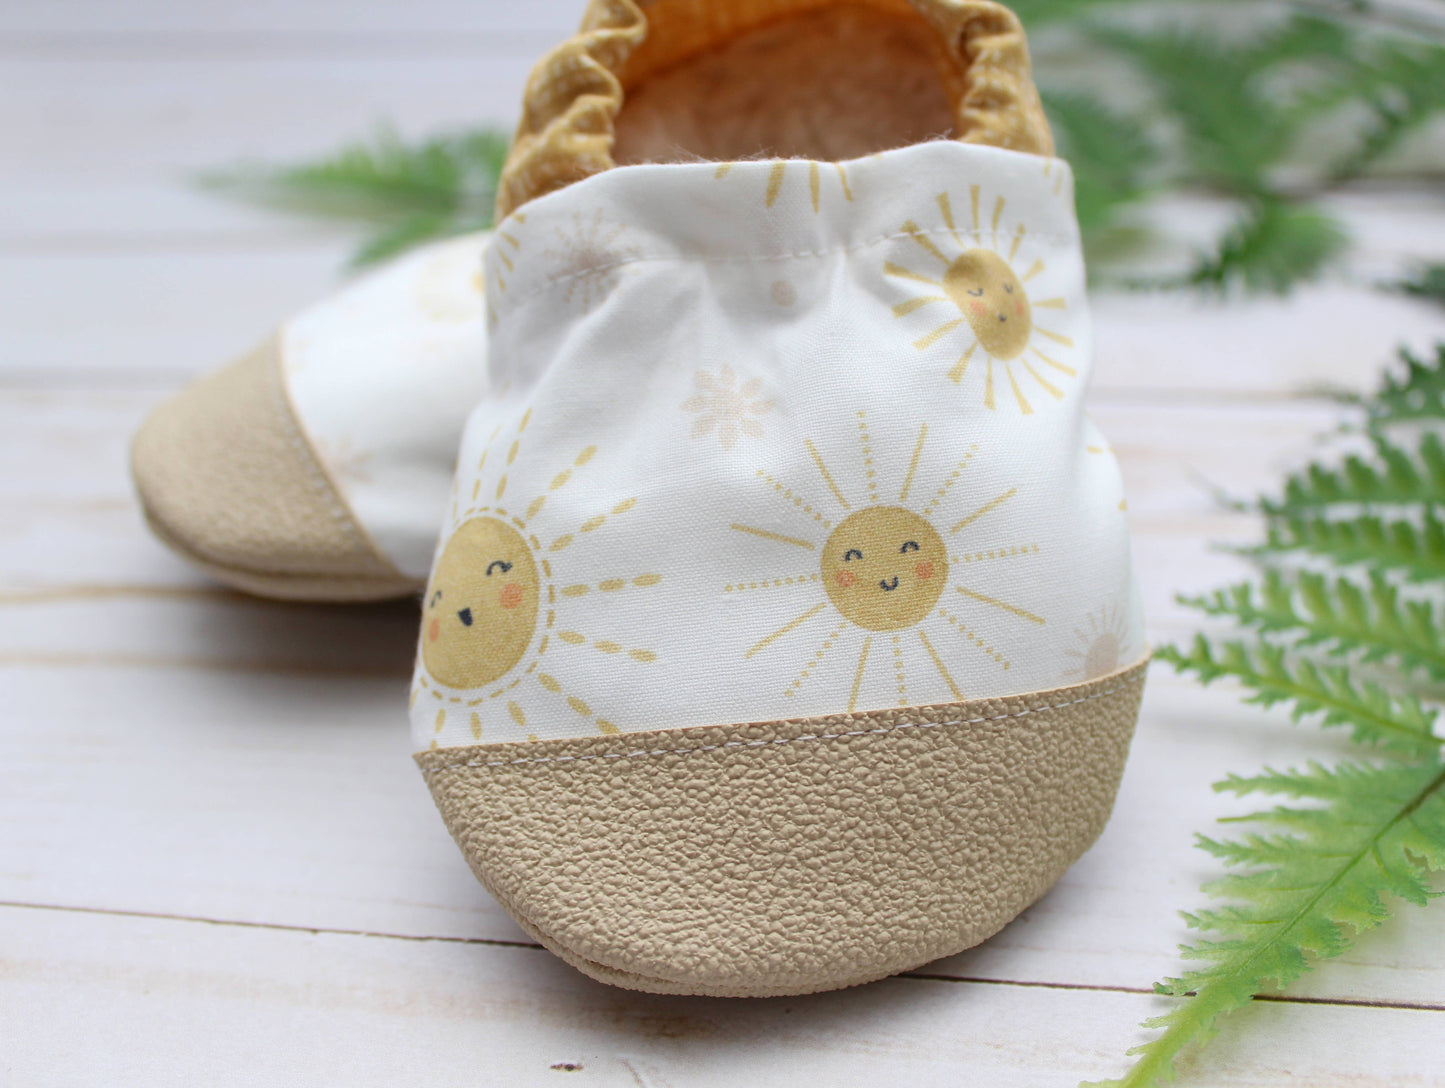 Scooter Booties - Sunshine Baby Shoes: 12 - 18 months